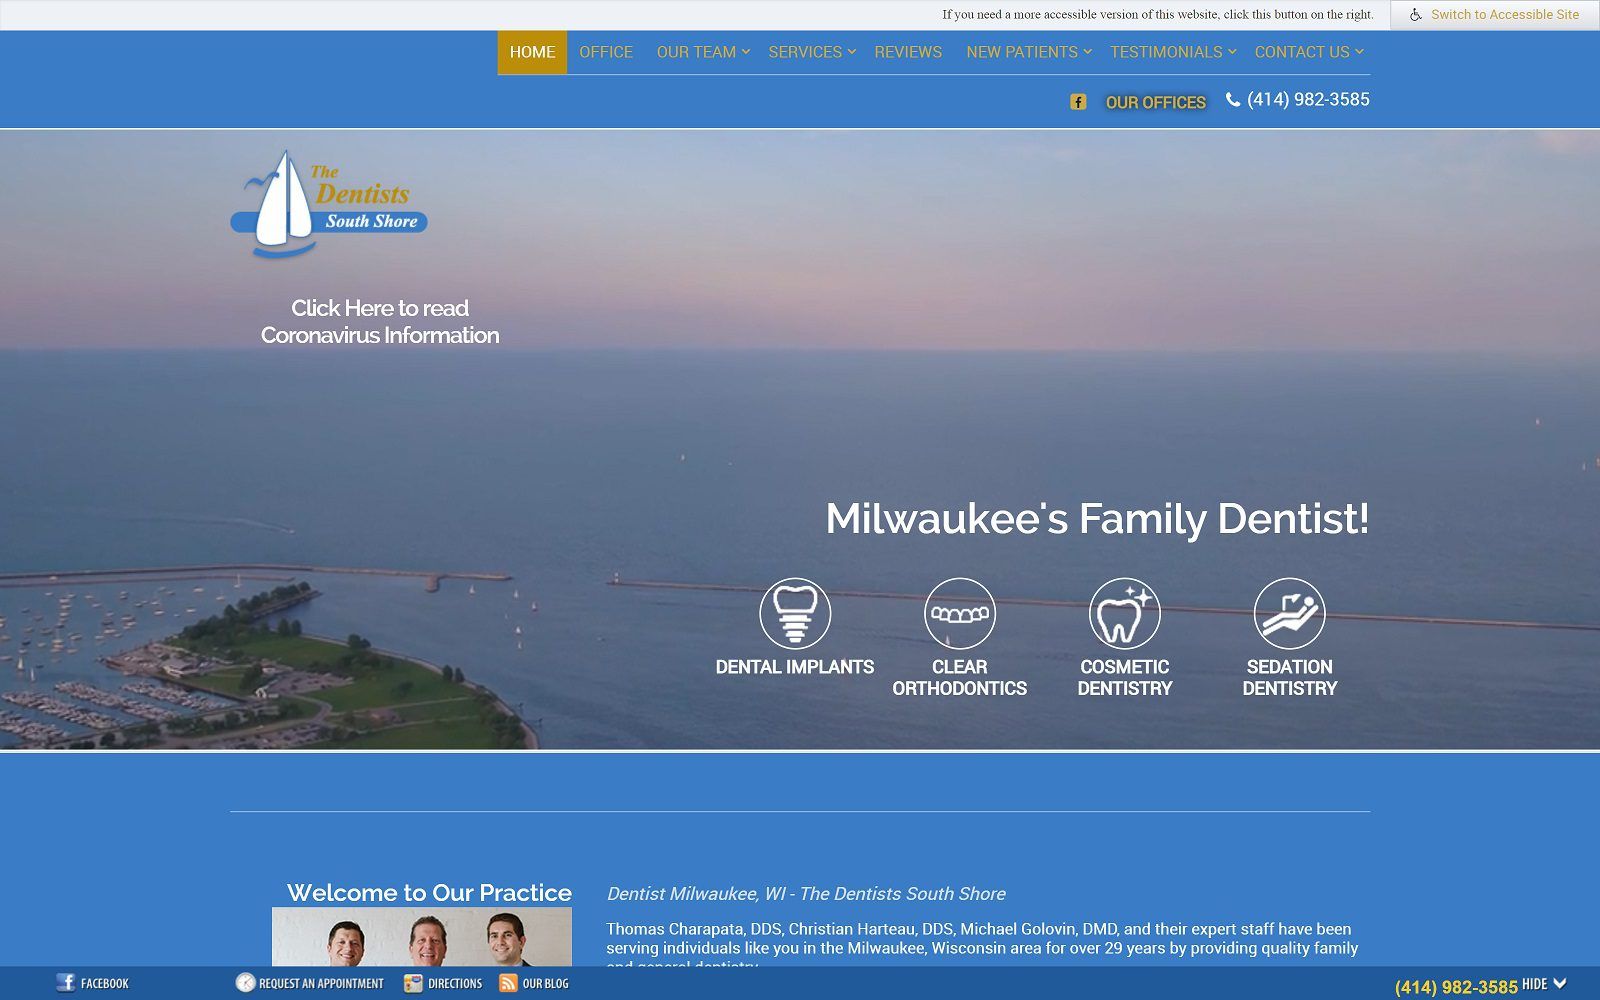 The Screenshot of The Dentists South Shore Website